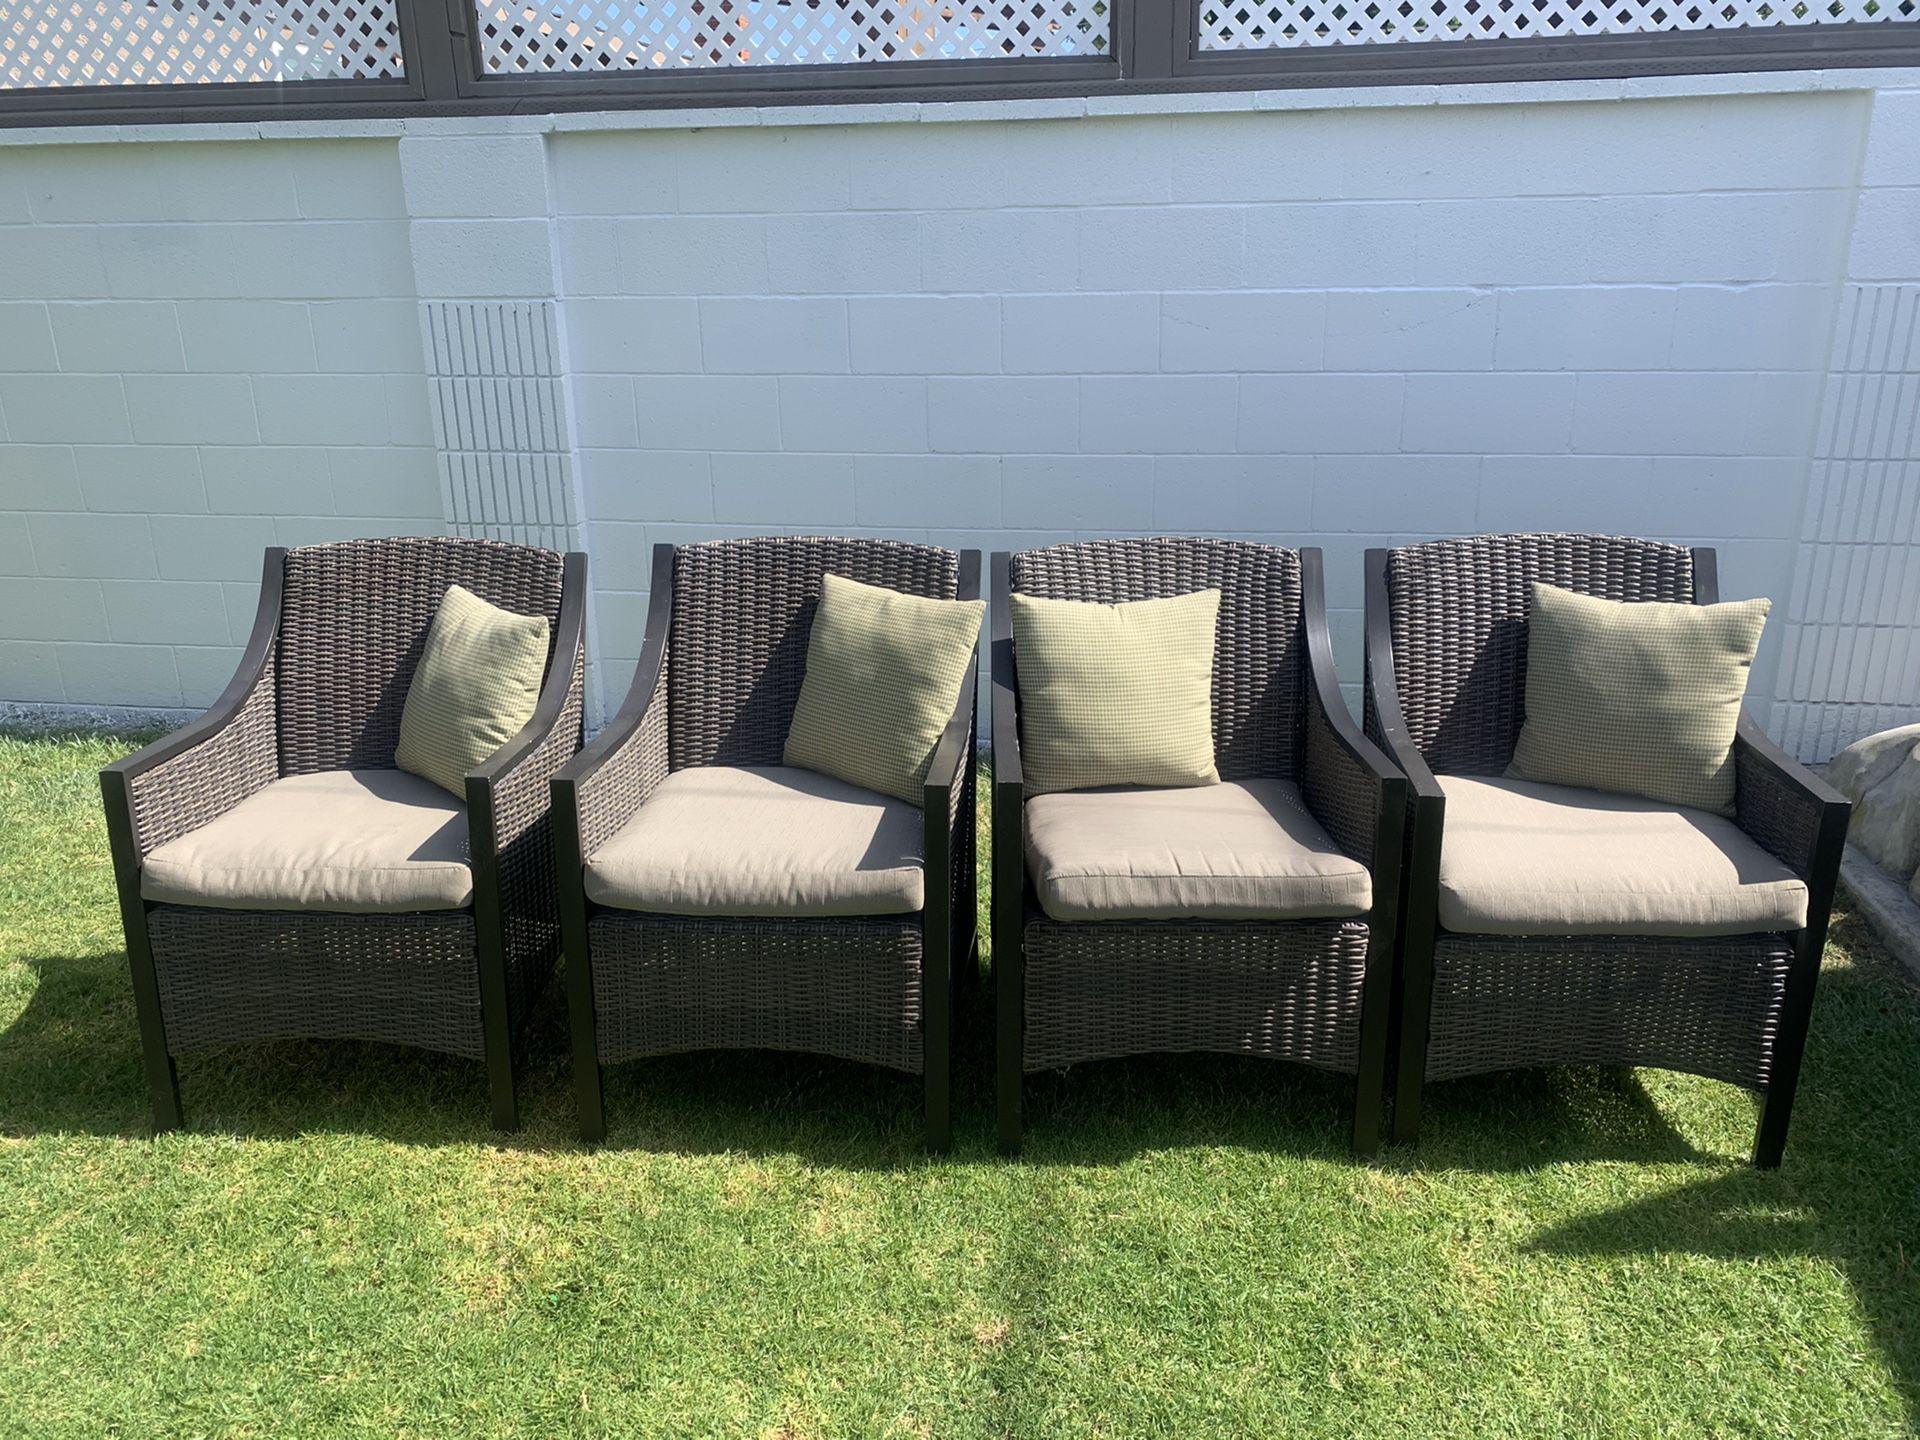 4 outdoor chairs in excellent condition